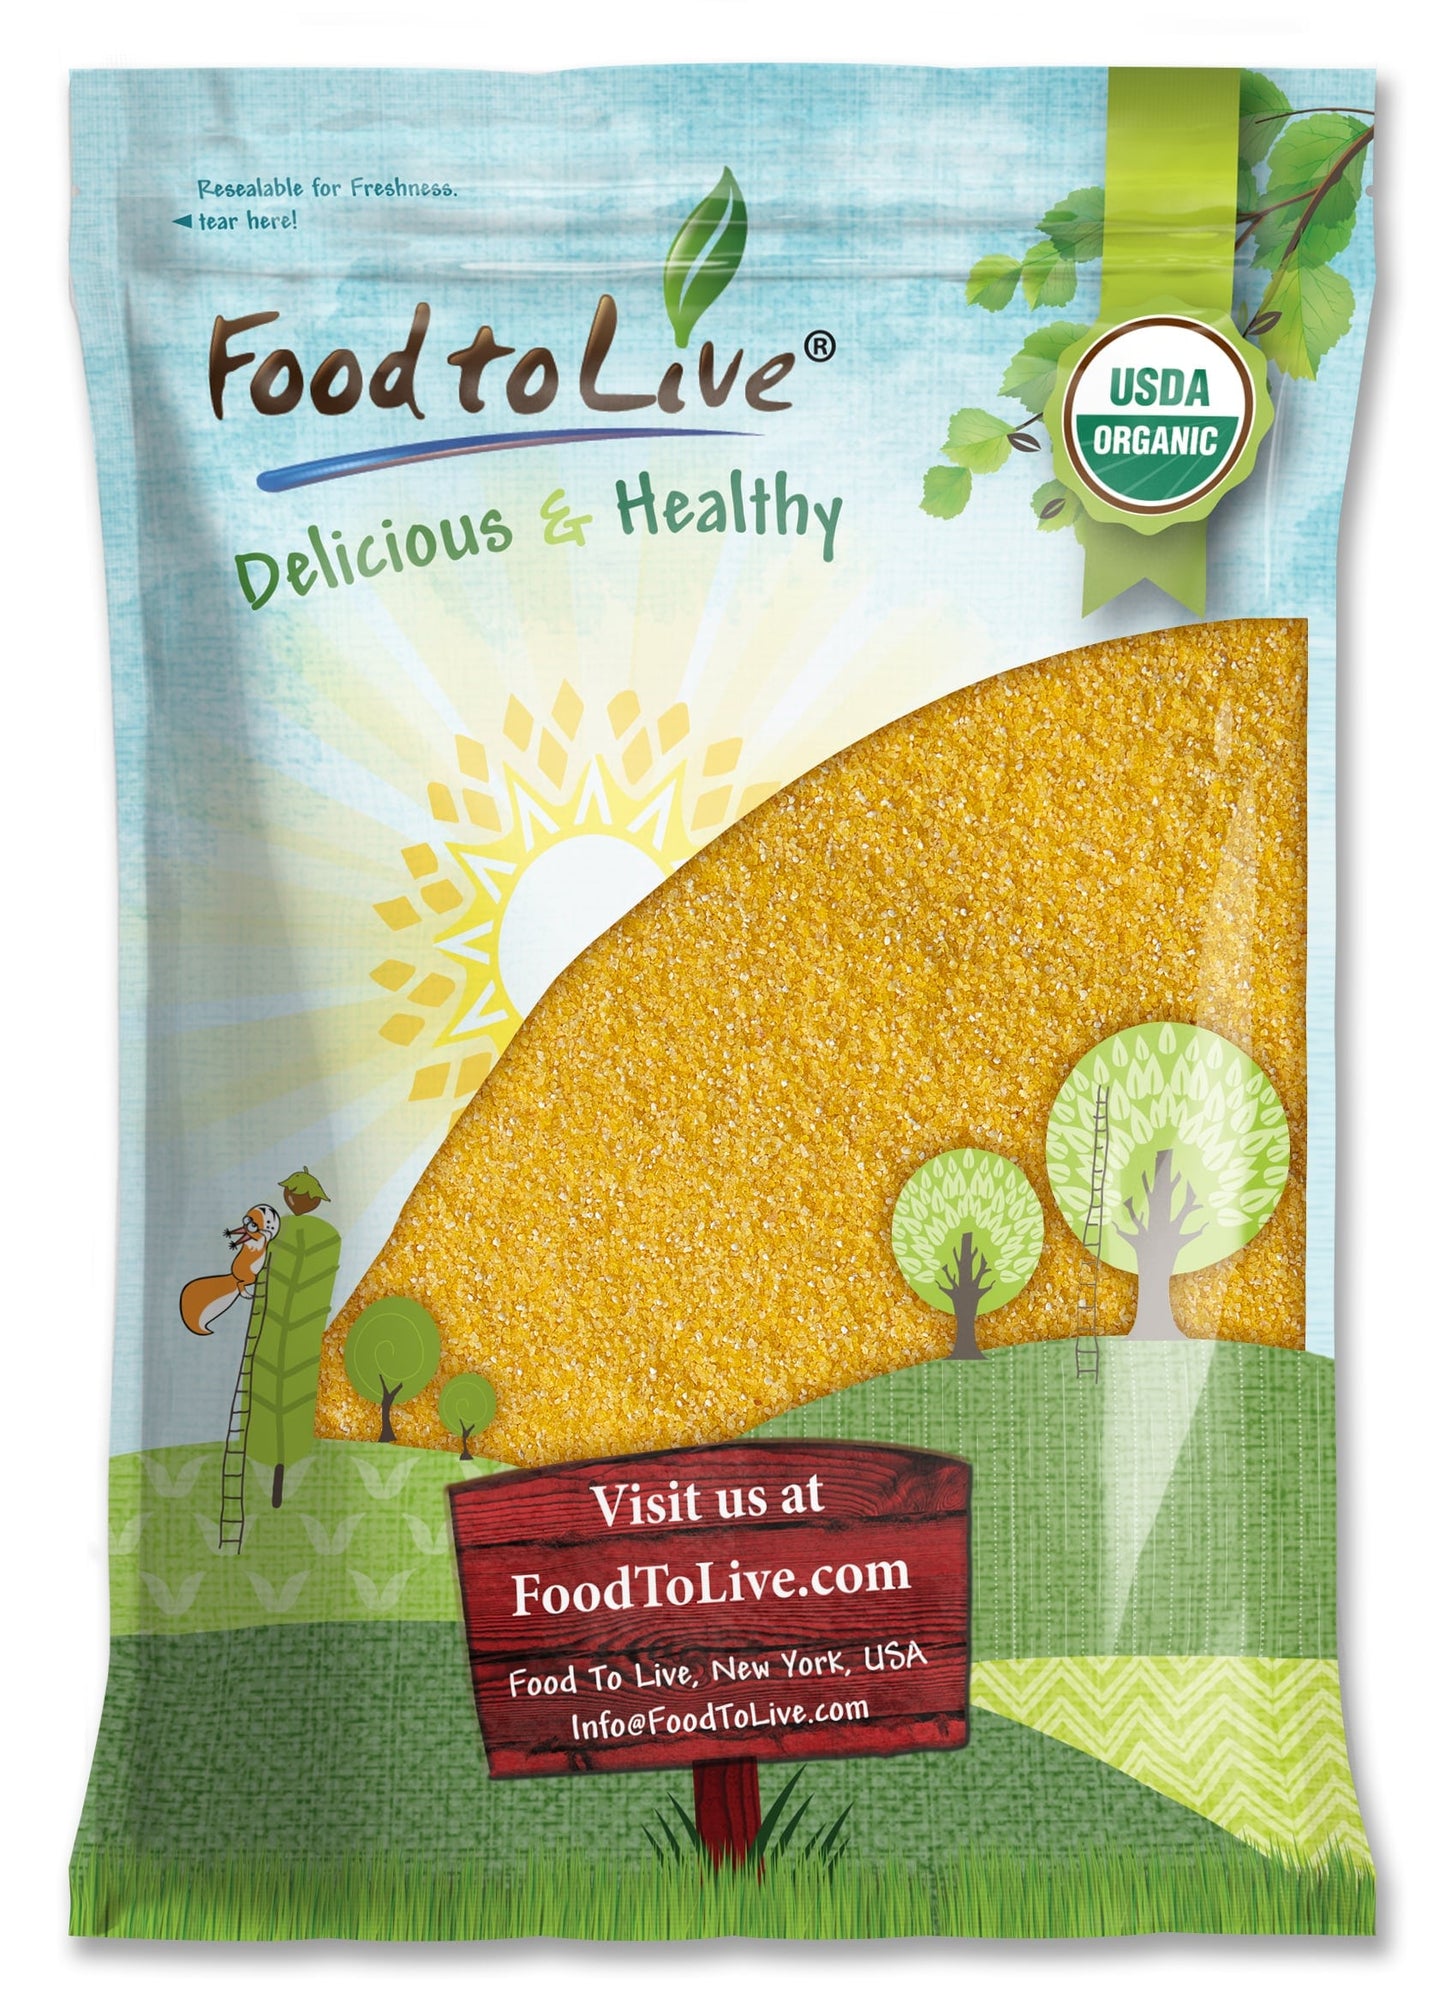 Organic Polenta - Non-GMO Yellow Corn Grits, Ground Cornmeal, Quick Cooking, Vegan, Kosher, Bulk, Great for Hot Cereal and Porridge. Low Sodium, Milled Maize, Corn Meal, Made in USA